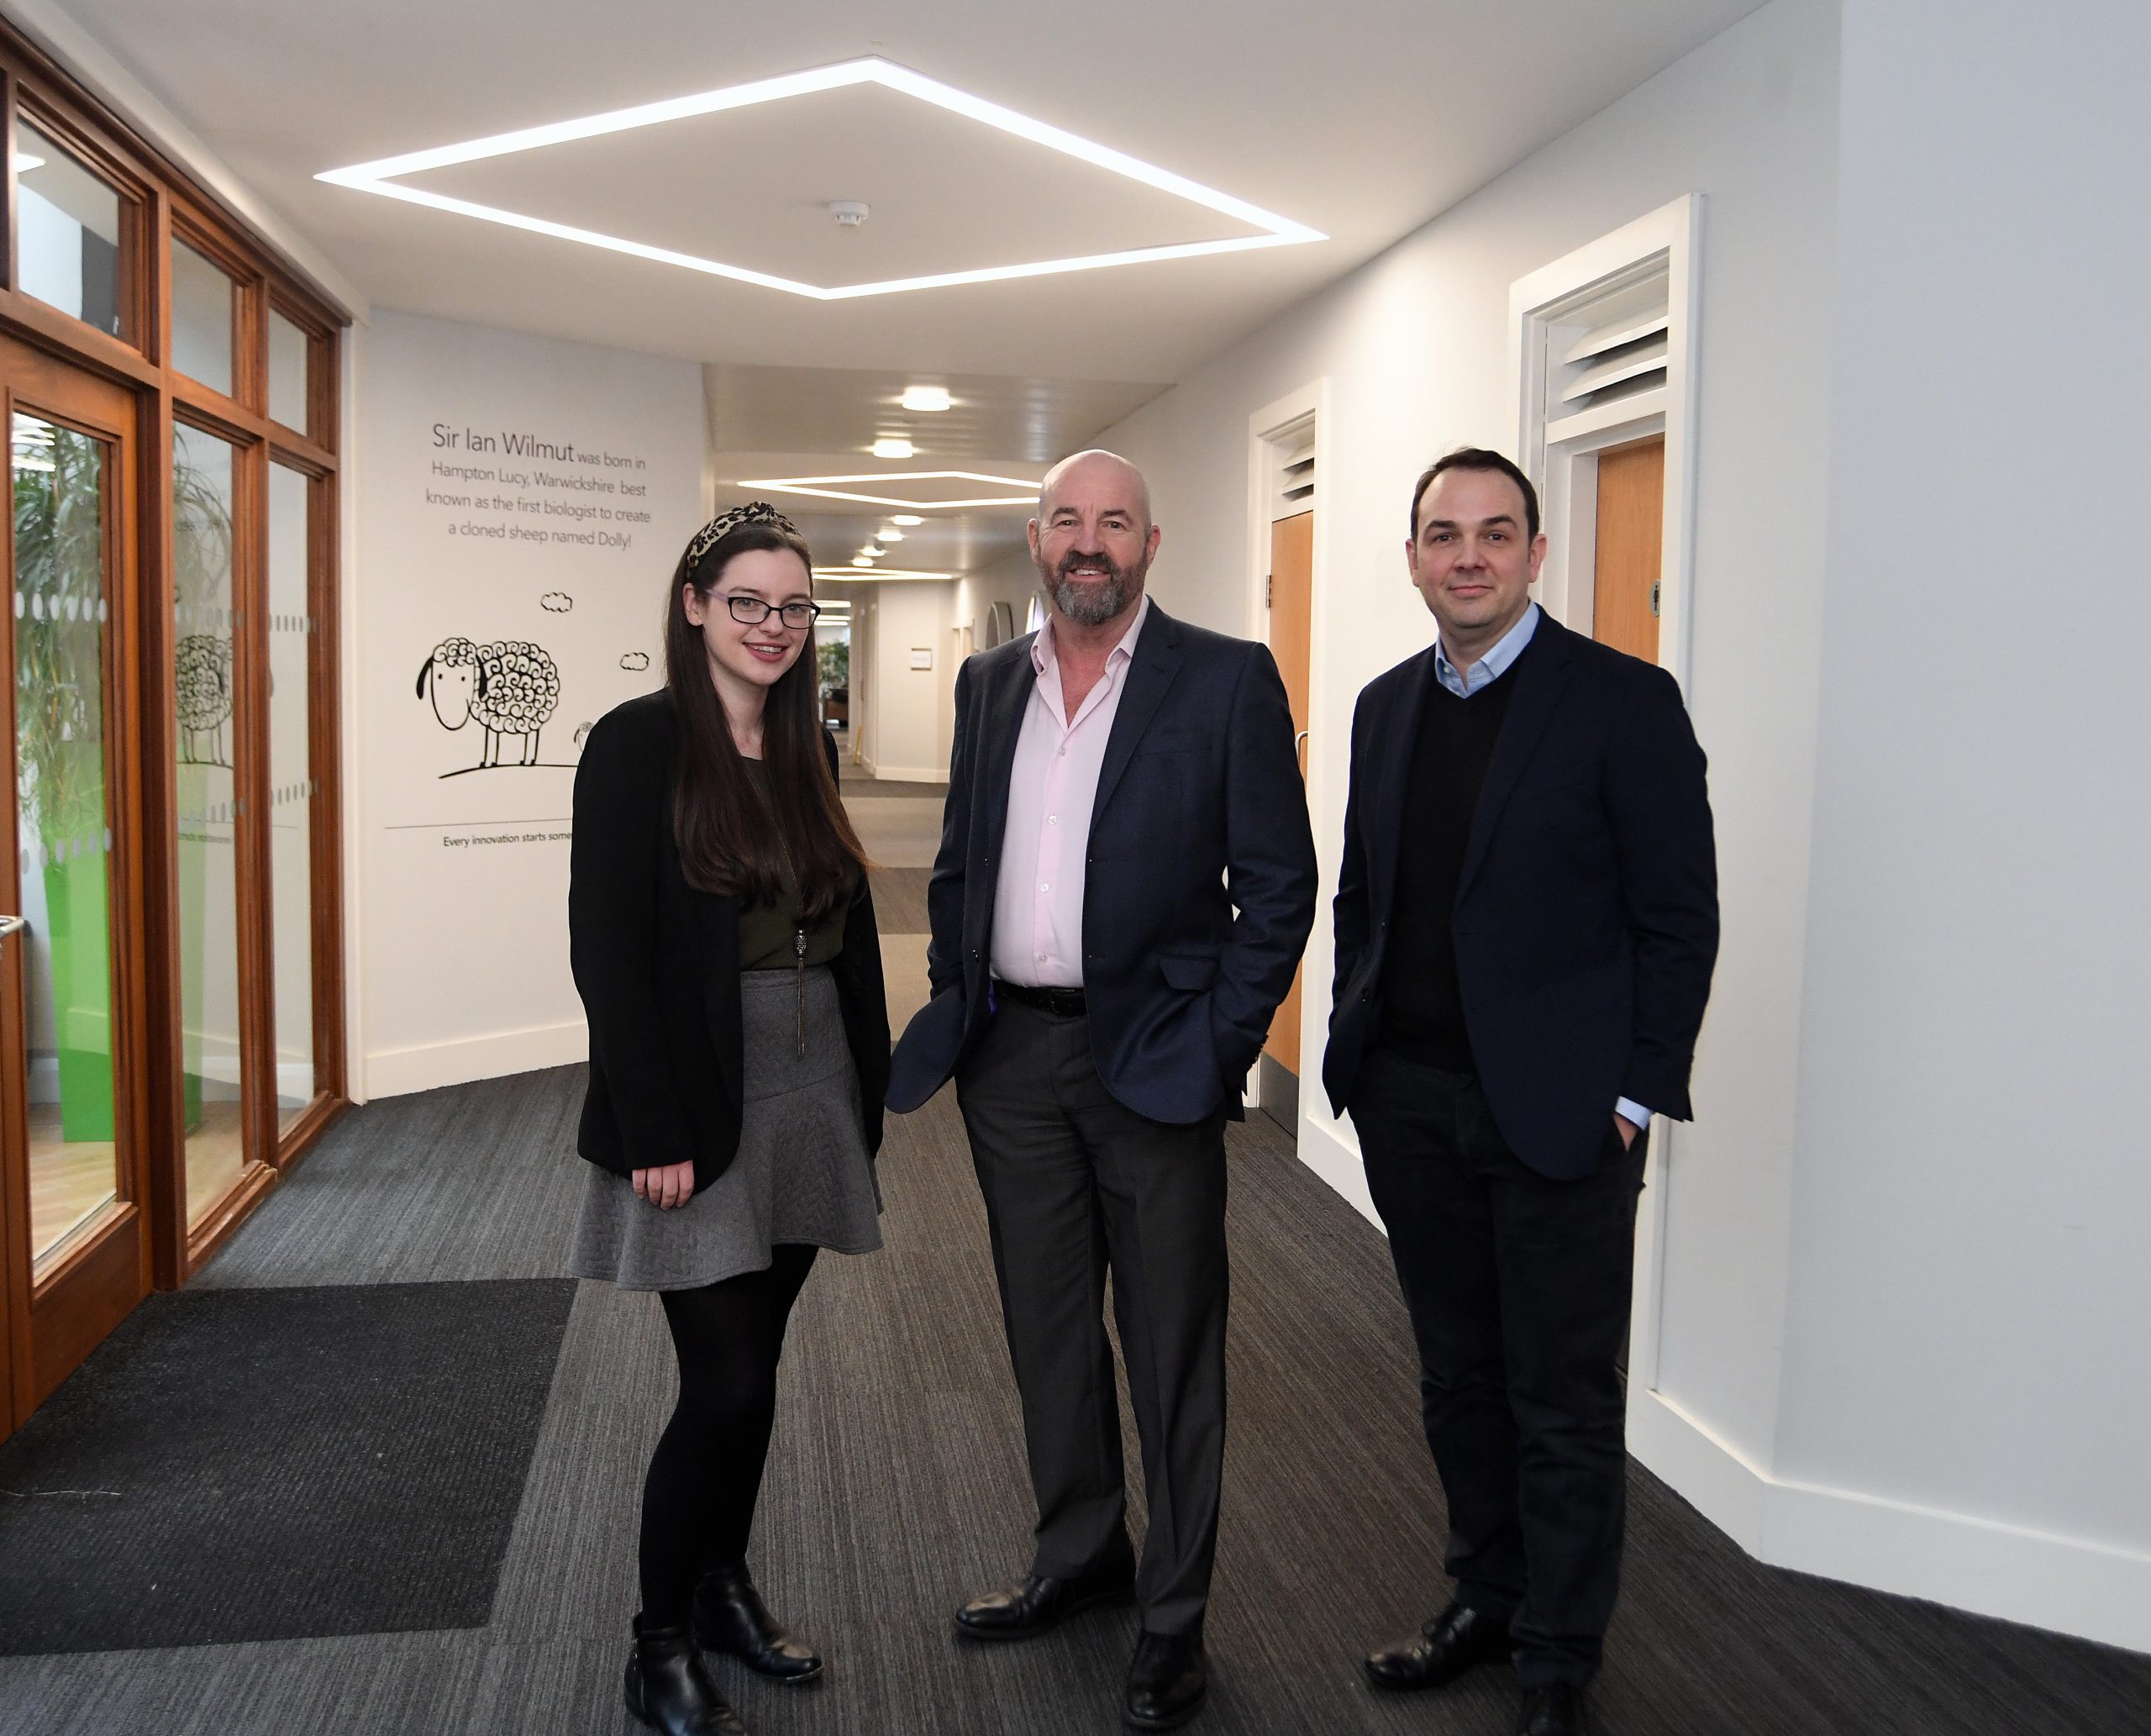 Two new business experts join Business Ready team